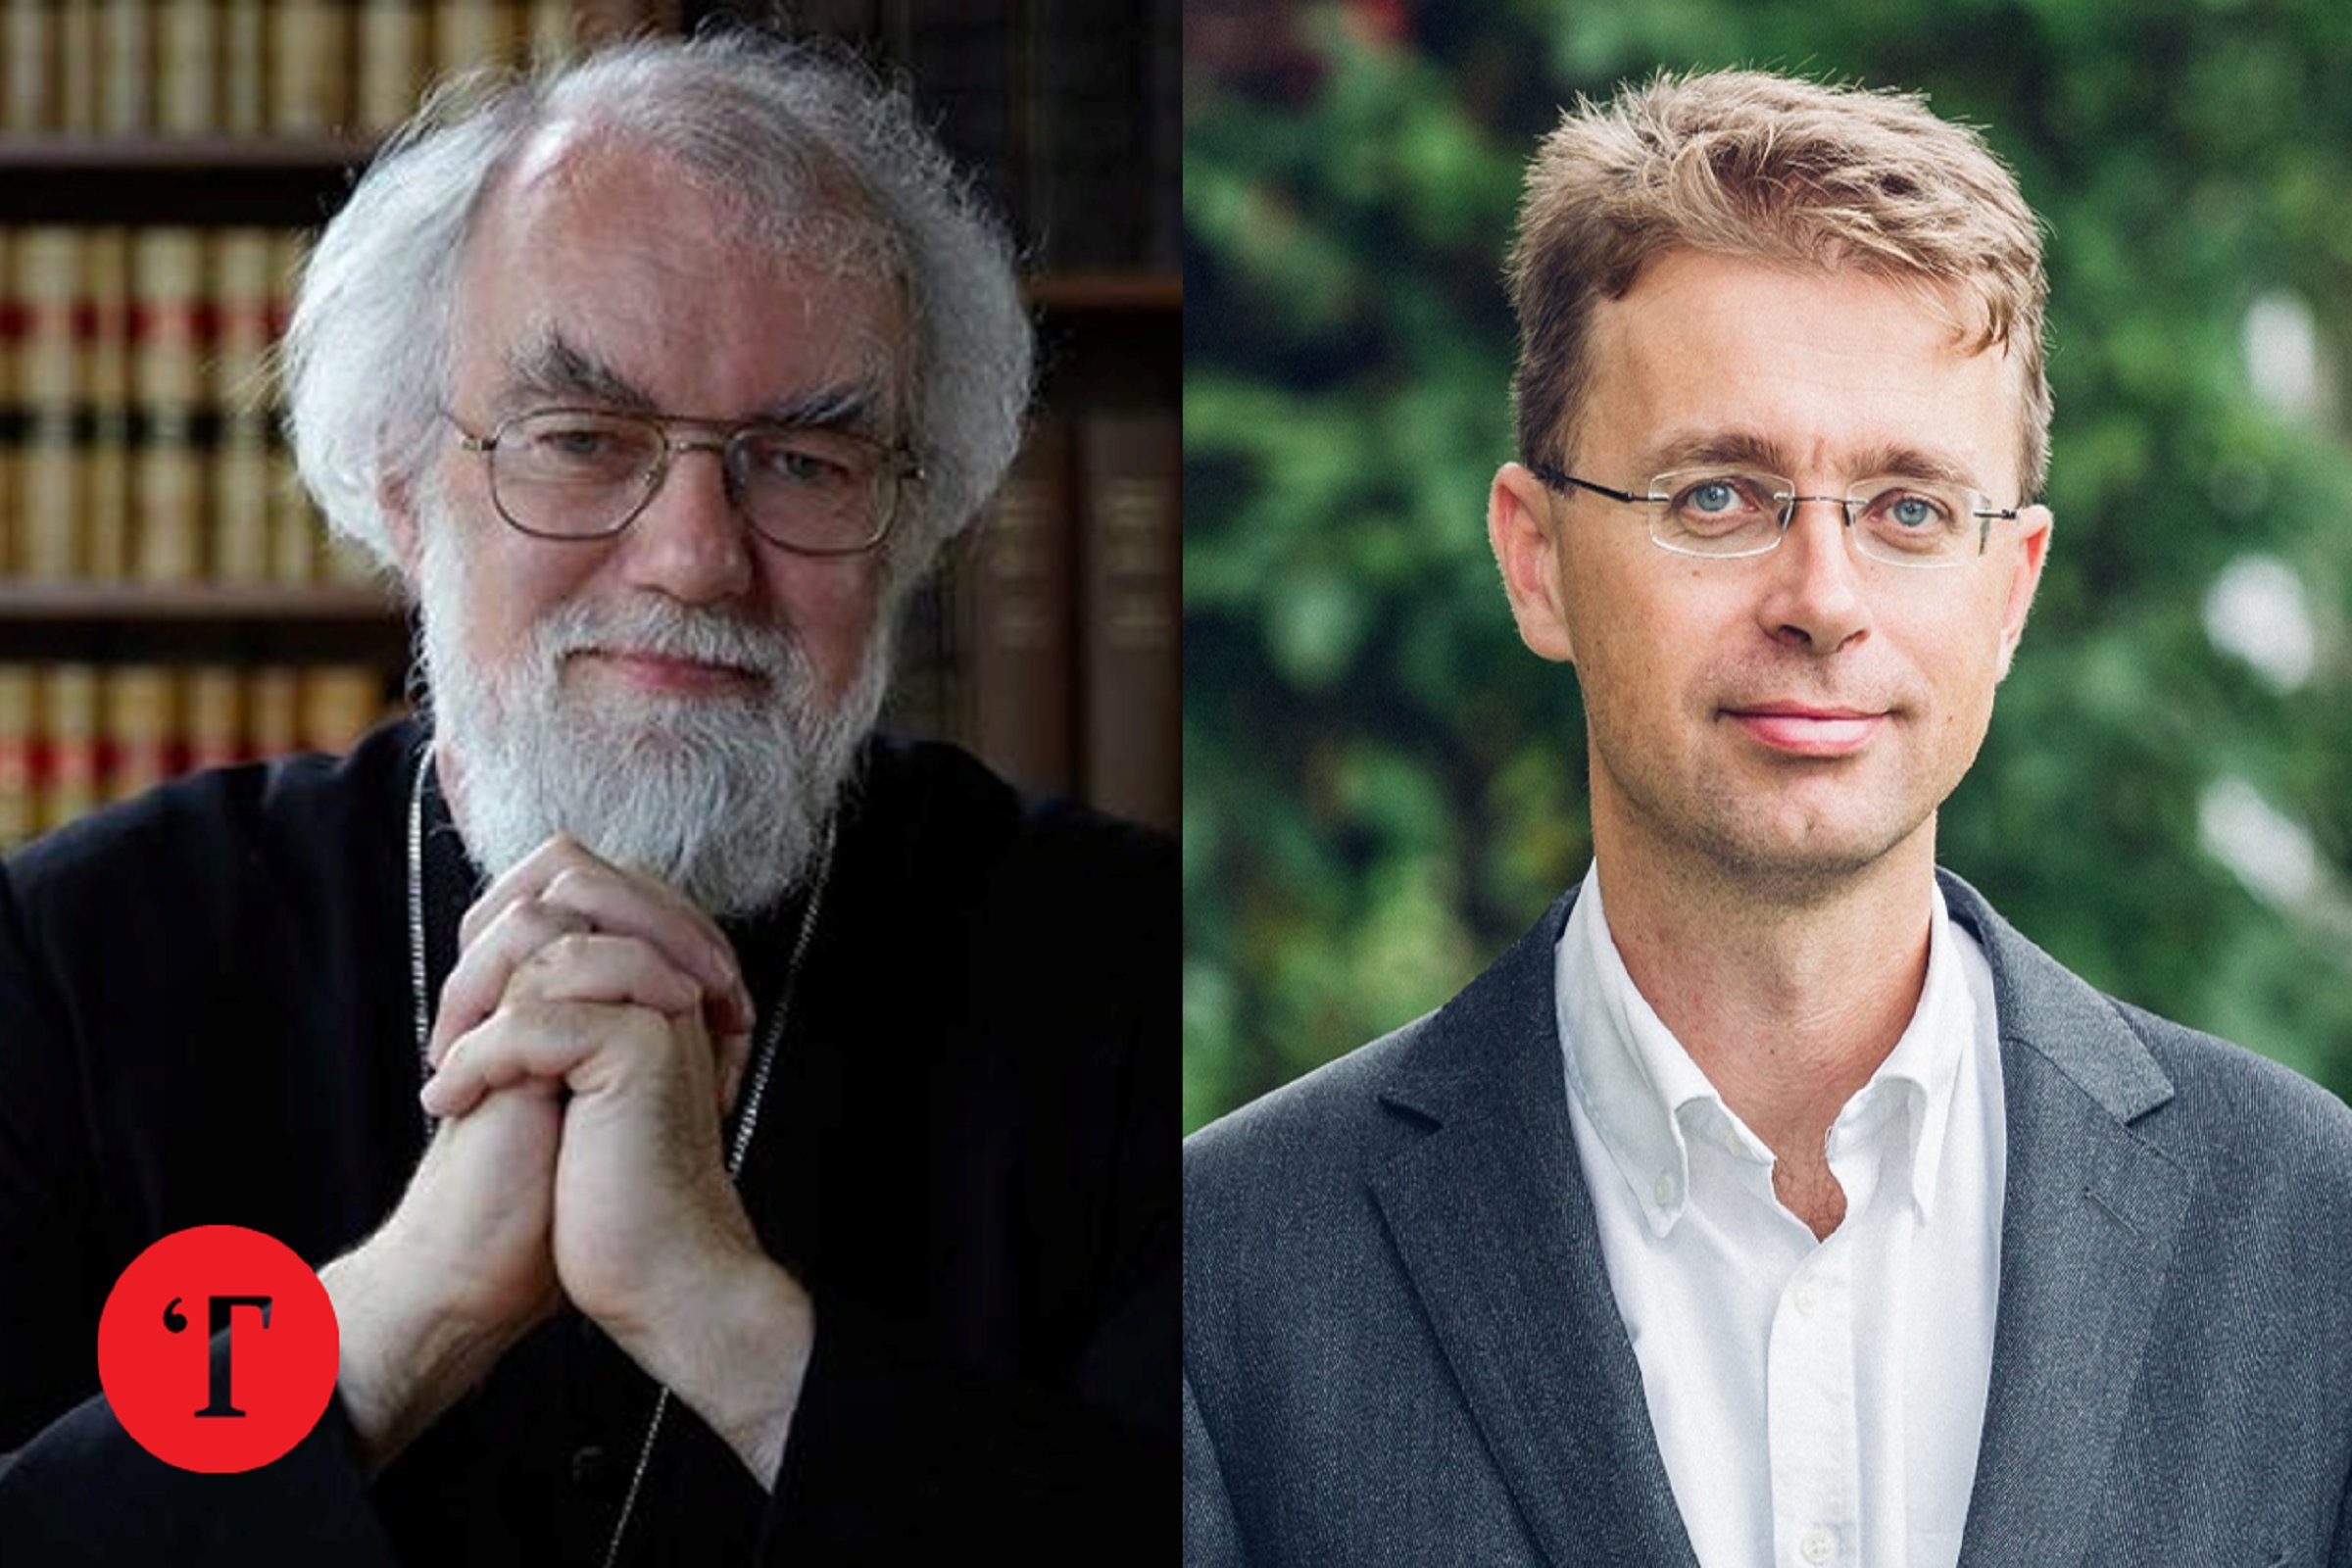 Nick Spencer in conversation with Rowan Williams